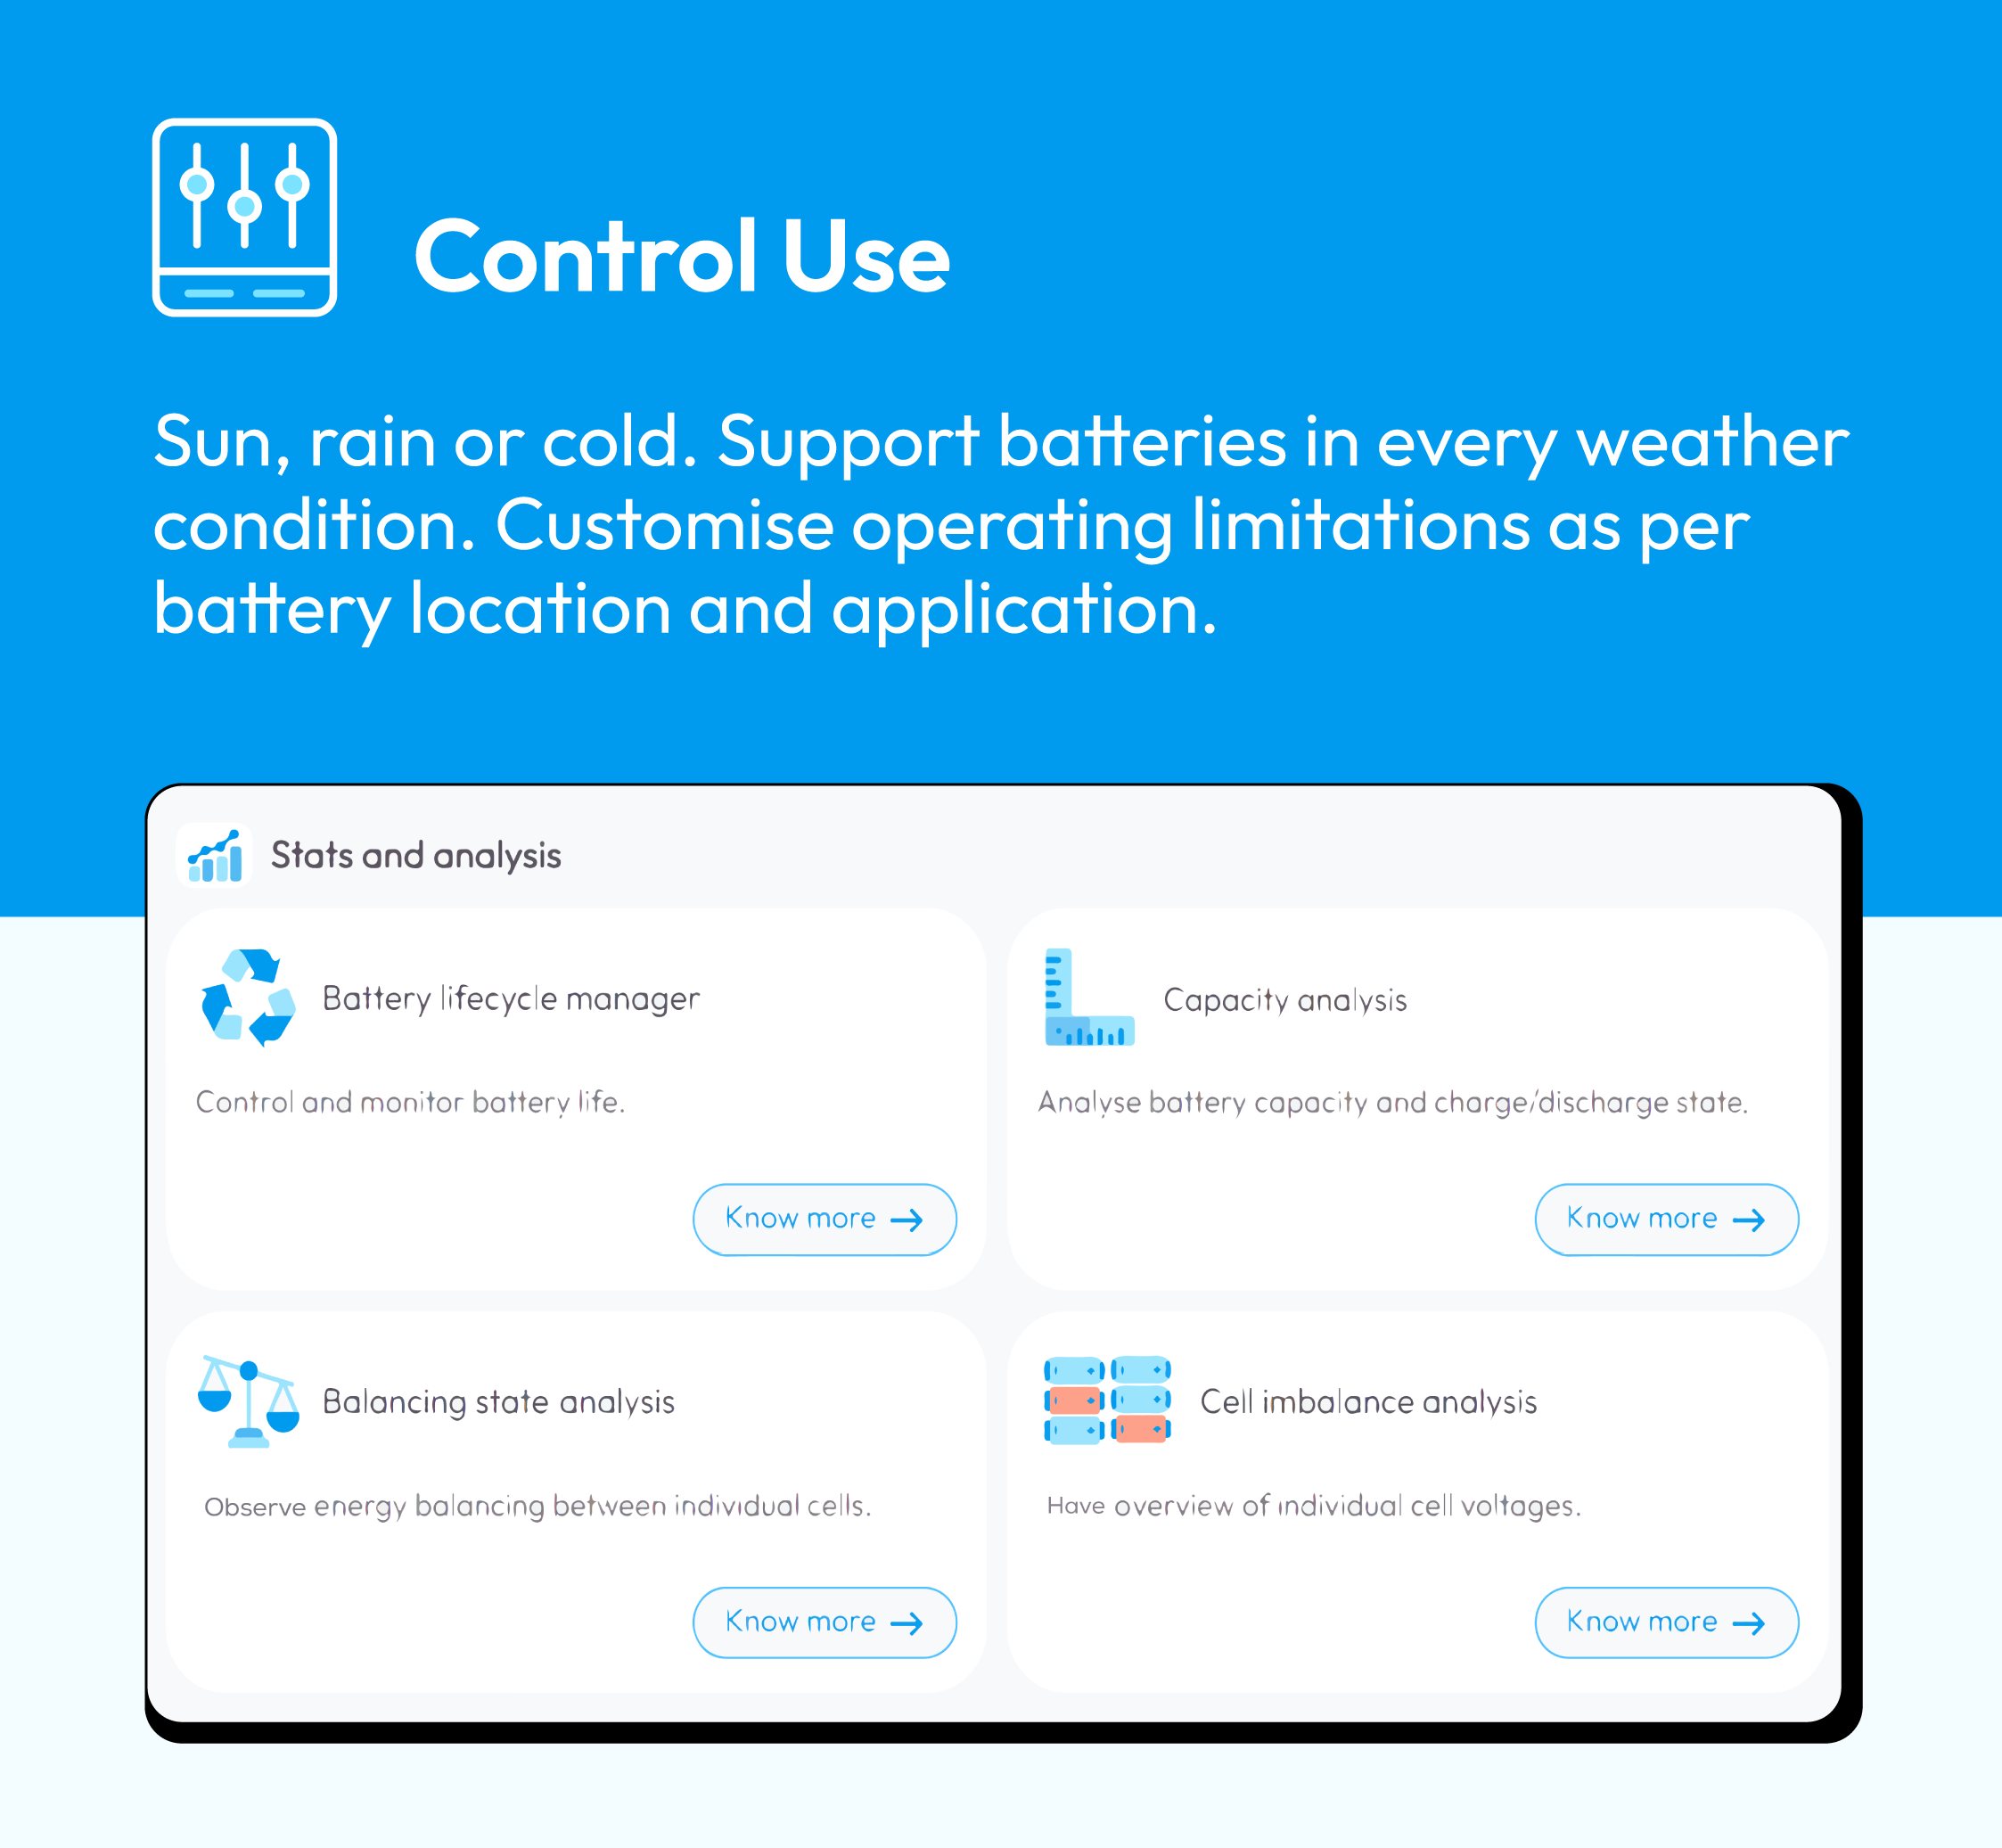 Control use : Sun, rain or cold. Support batteries in every weather condition. Customise operating limitations as per battery location and application.